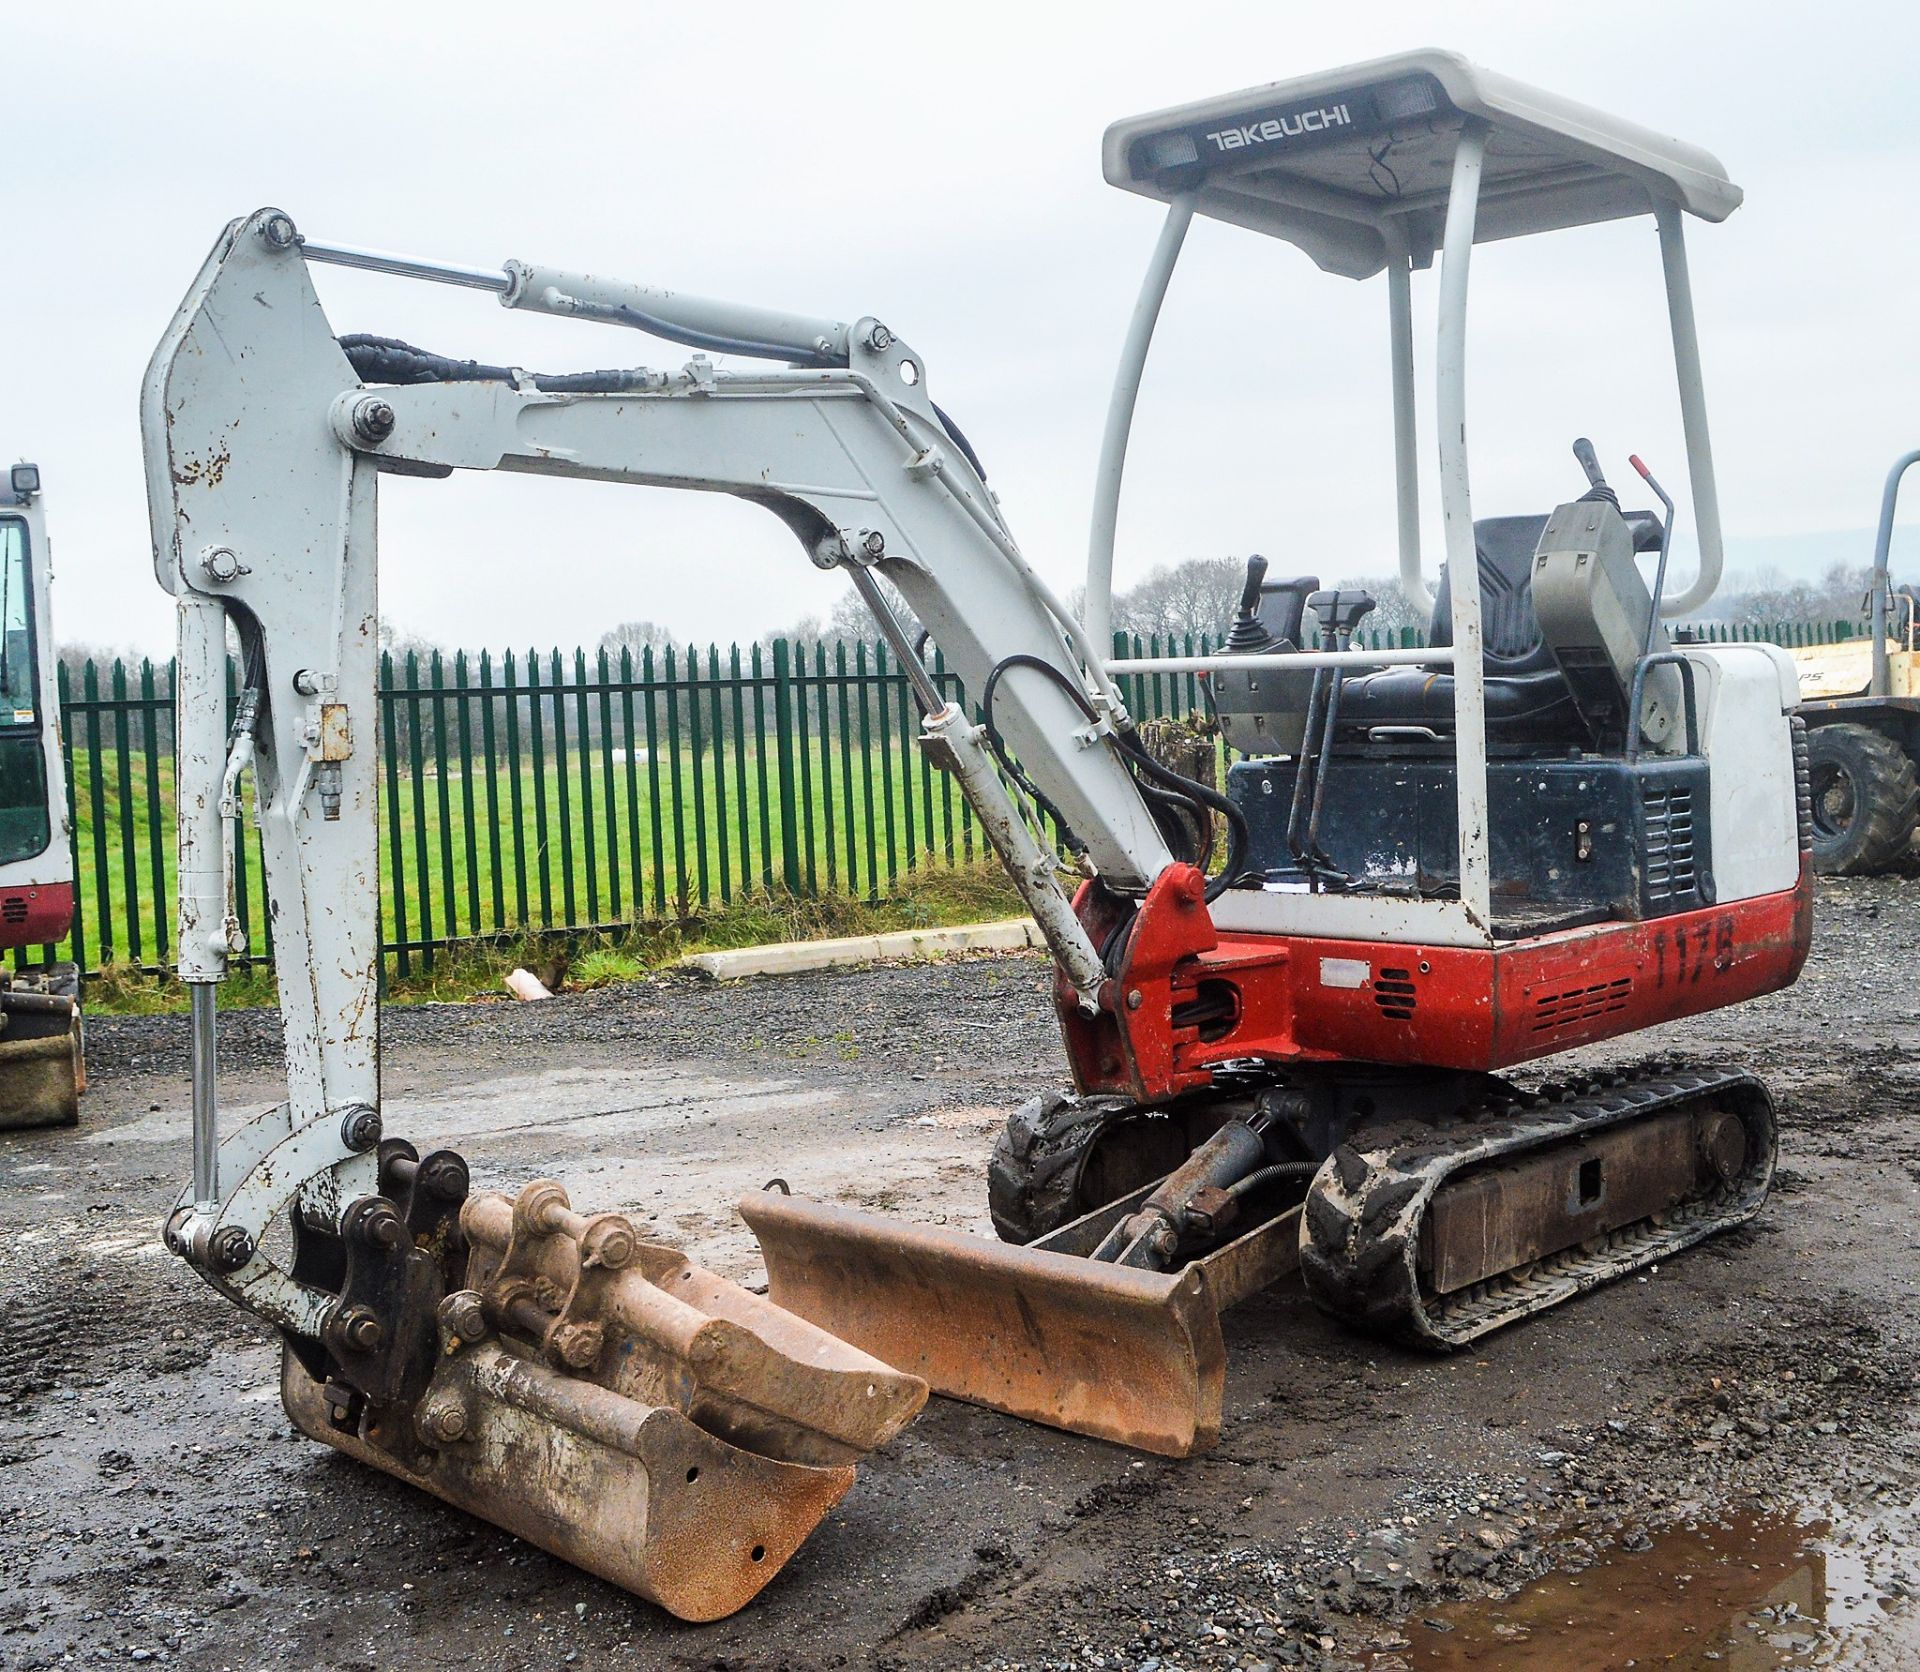 Takeuchi TB014 1.5 tonne rubber tracked excavator Year: 2008 S/N: 11410717 Recorded Hours: Not